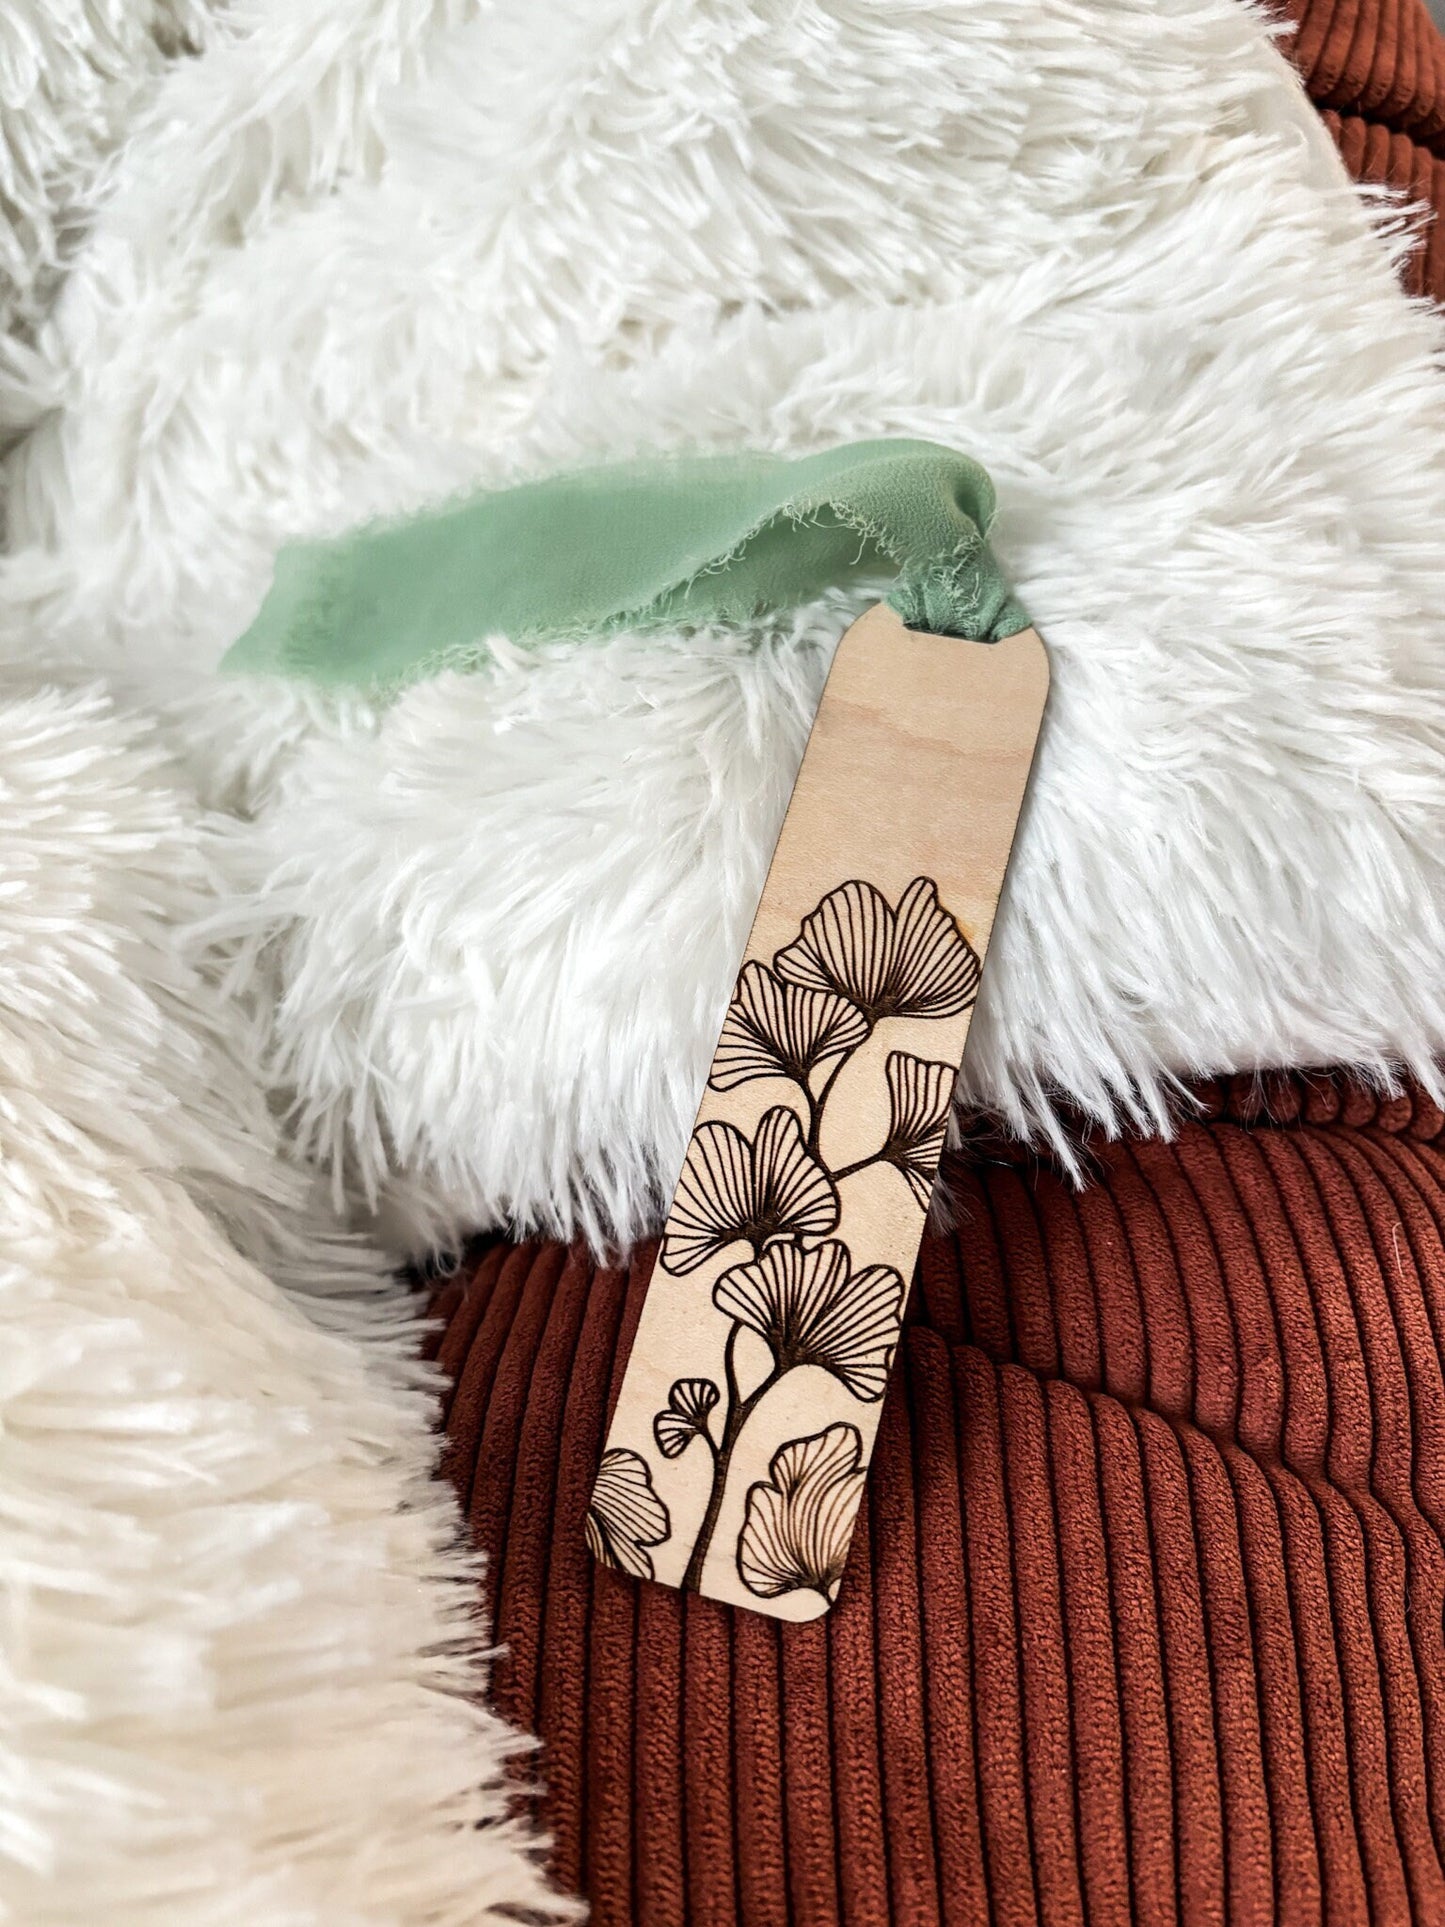 Greenery Designs Wood Bookmark, Acrylic Leaves Bookmark, Funny Bookmark Gift, Laser Engraved Bookmark, Aesthetic Floral Acrylic Bookmark